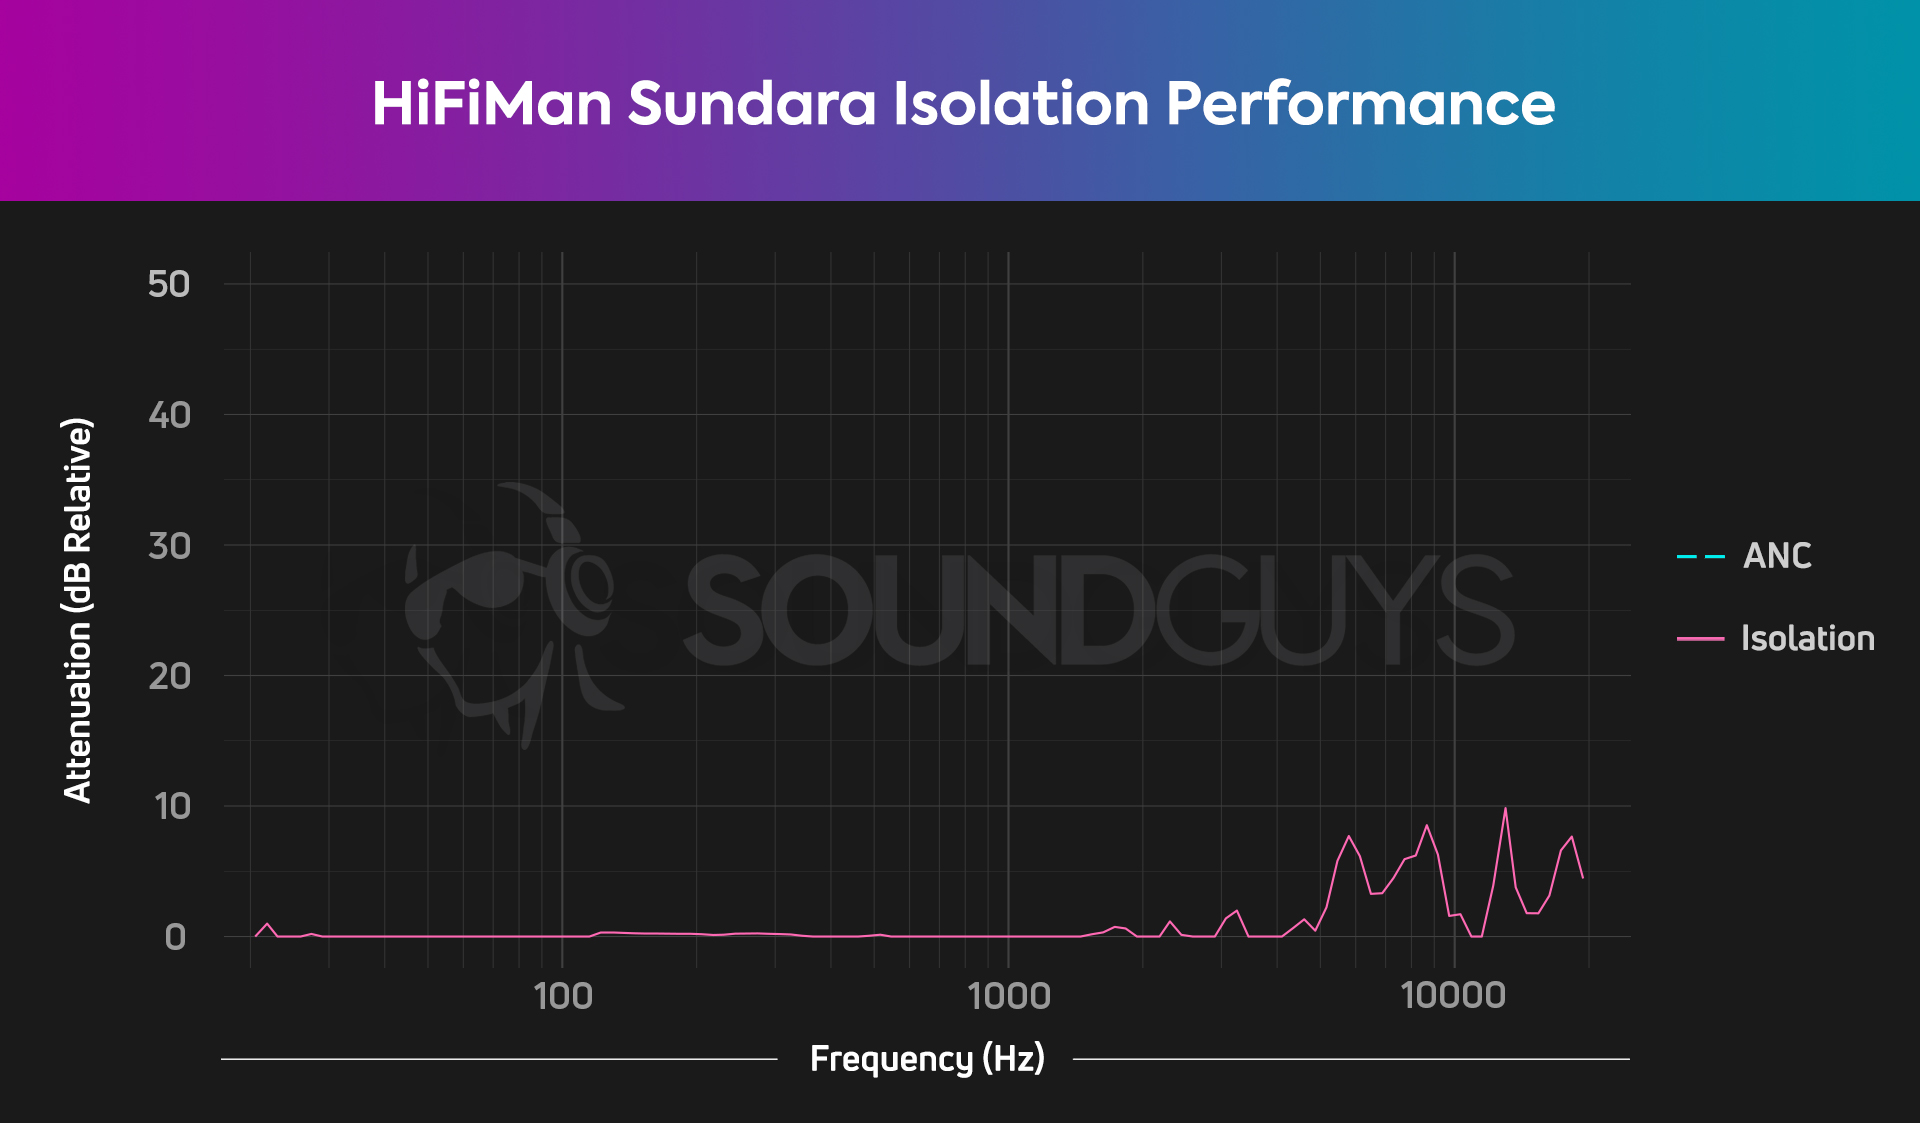 The HiFiMan Sundara is a set of open-backed headphones, and as such doesn't block outside noise much at all.